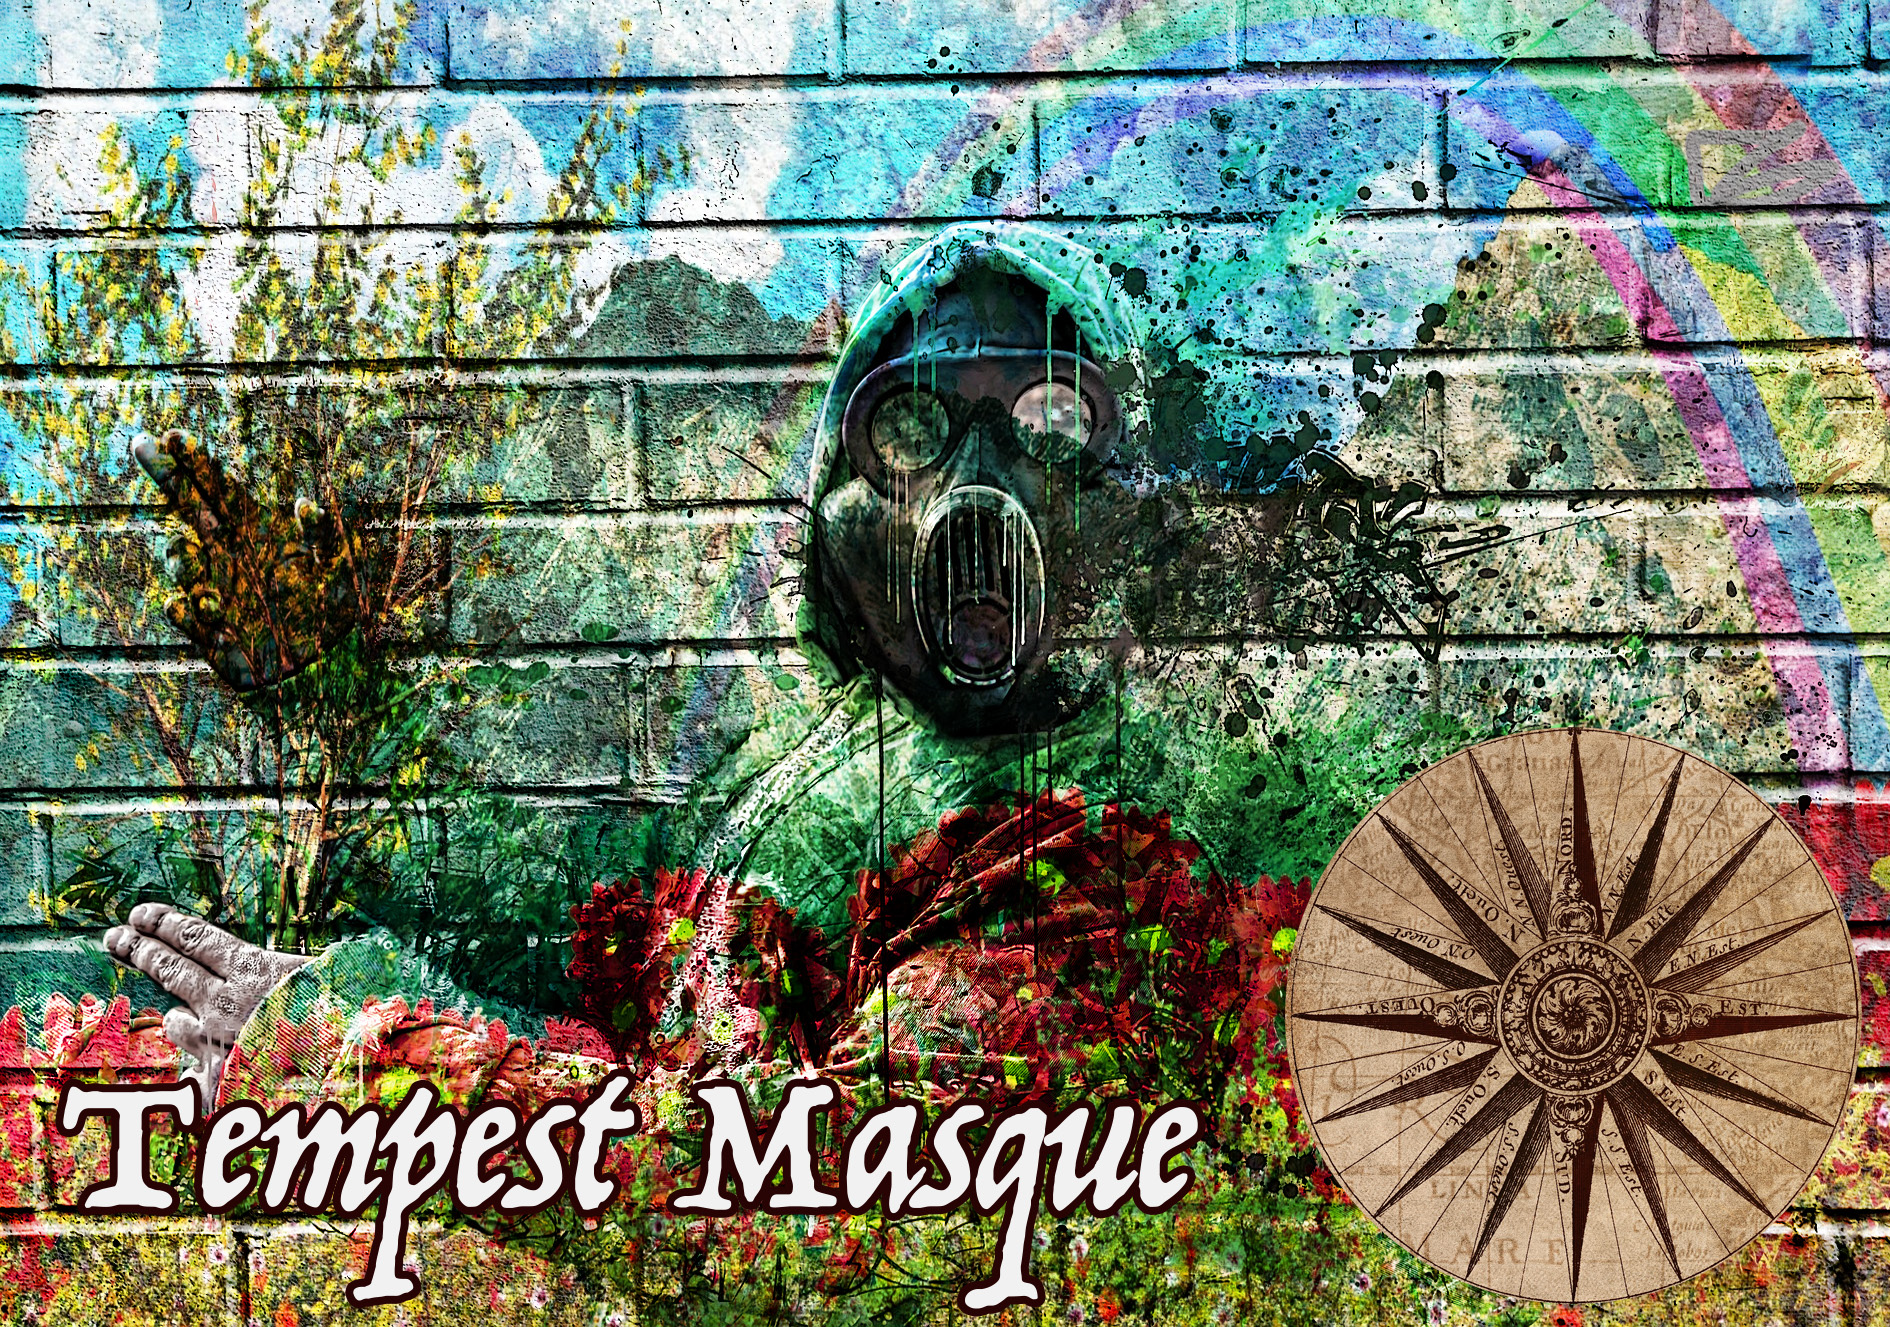 Tempest Masque poster depicting grafiti artwork of a mask wearer in a brick wall with a compass and the copy "Tempest Masque"